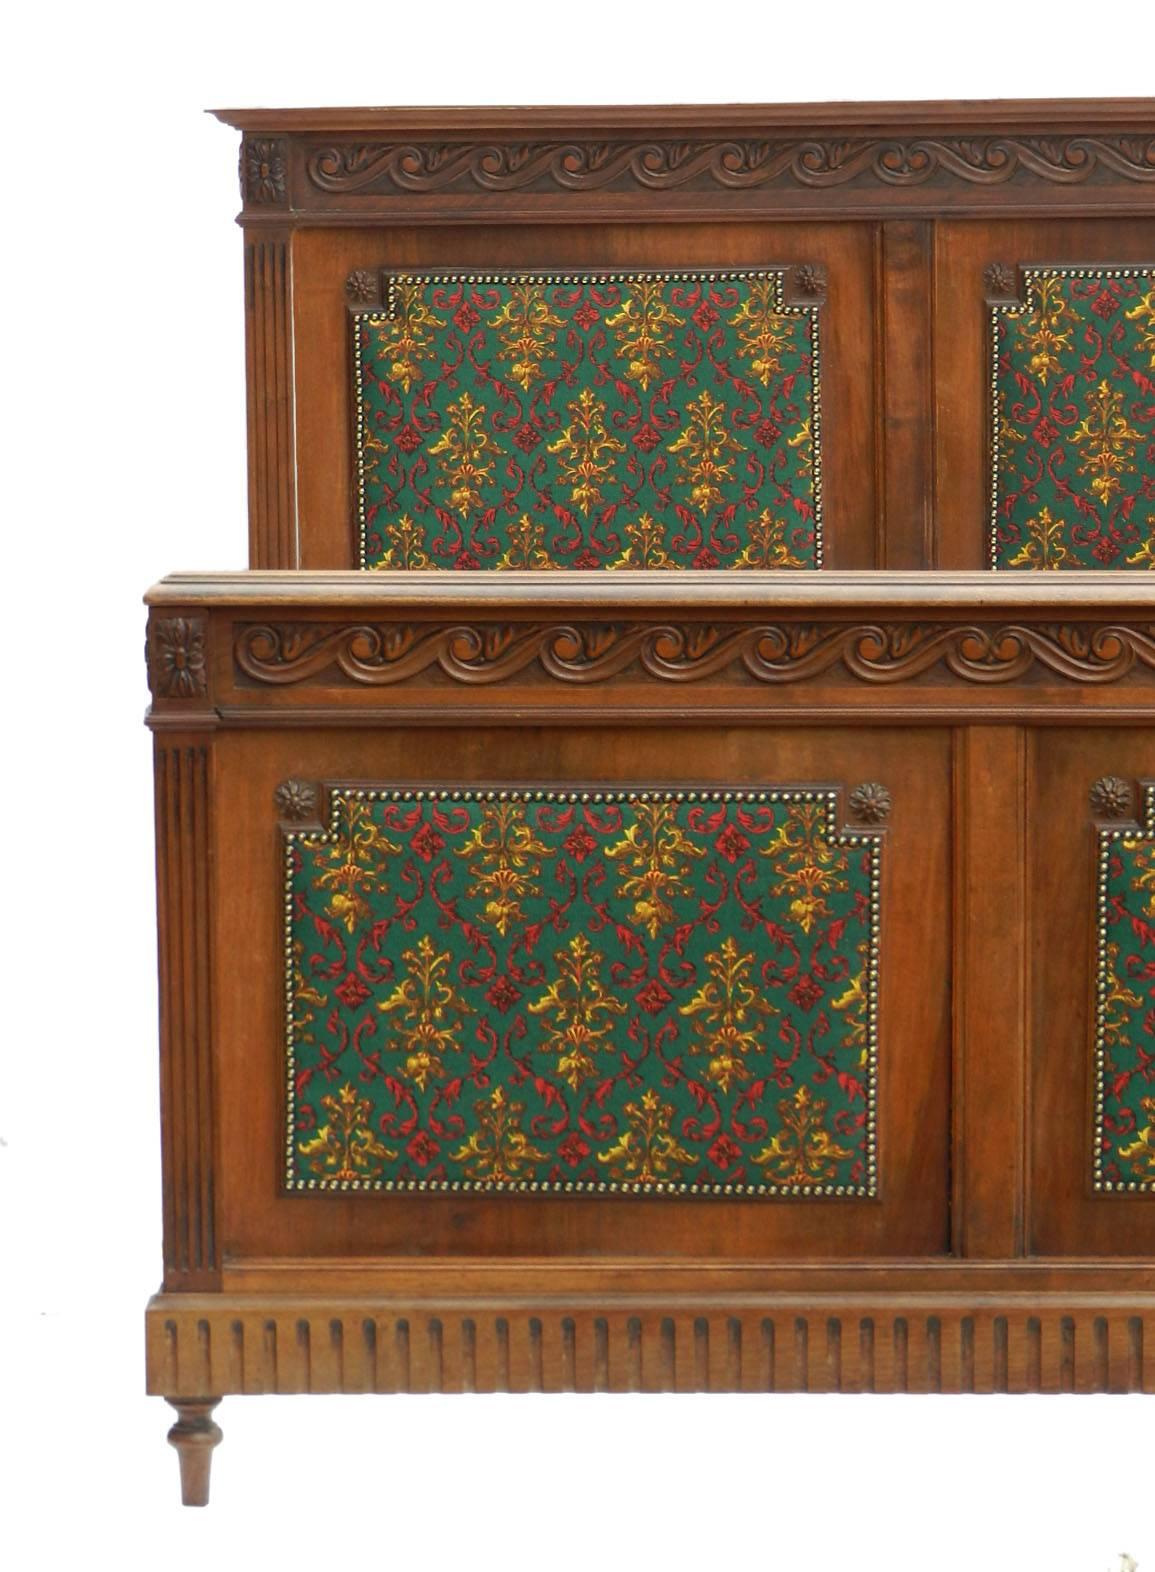 Unusual antique French gentleman's chateau bed with upholstered and studded panels we can change top covers if preferred before shipping please ask
19th century Louis Gothic revival carved walnut.
The fabric is deep kingfisher blue bottle green